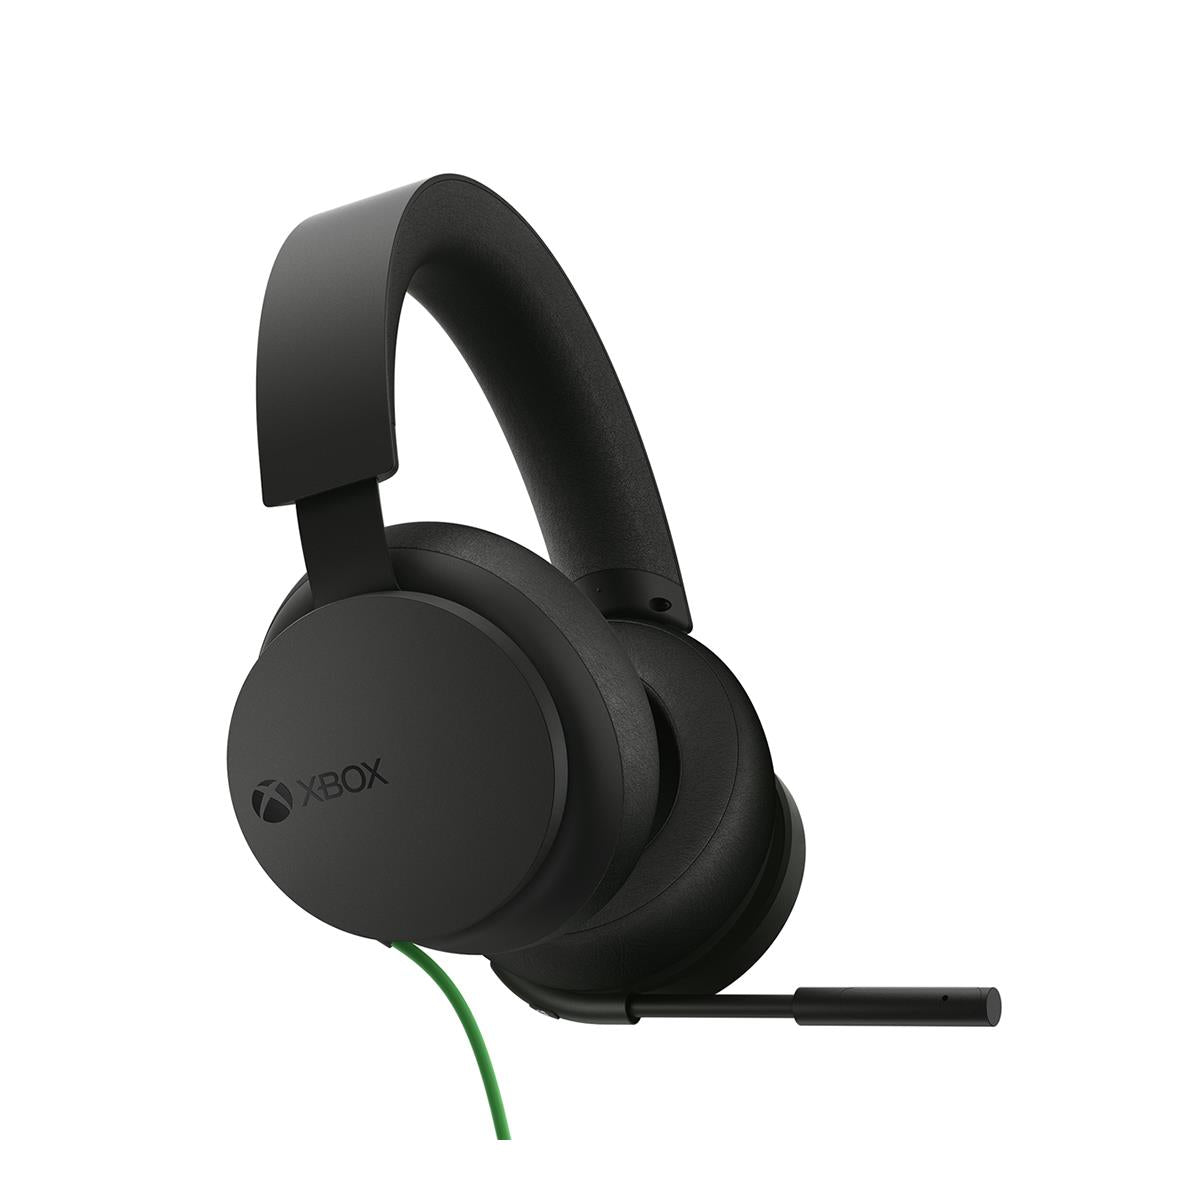 Xbox Wired Headset - Black